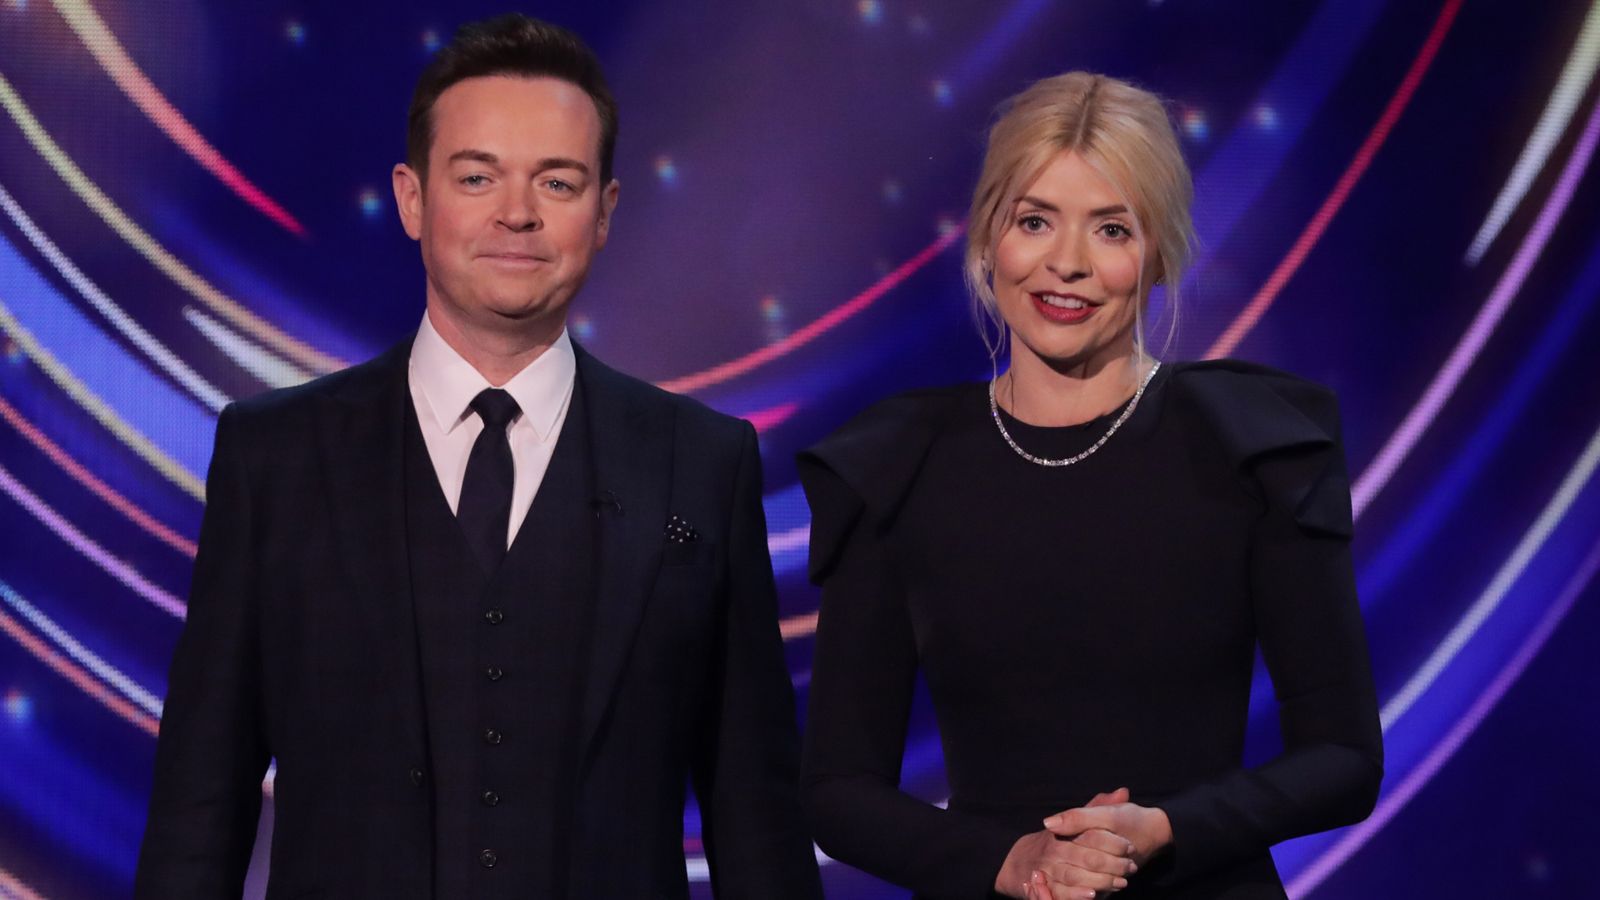 Dancing On Ice: ITV lines up Stephen Mulhern to co-host with Holly Willoughby and replace Phillip Schofield